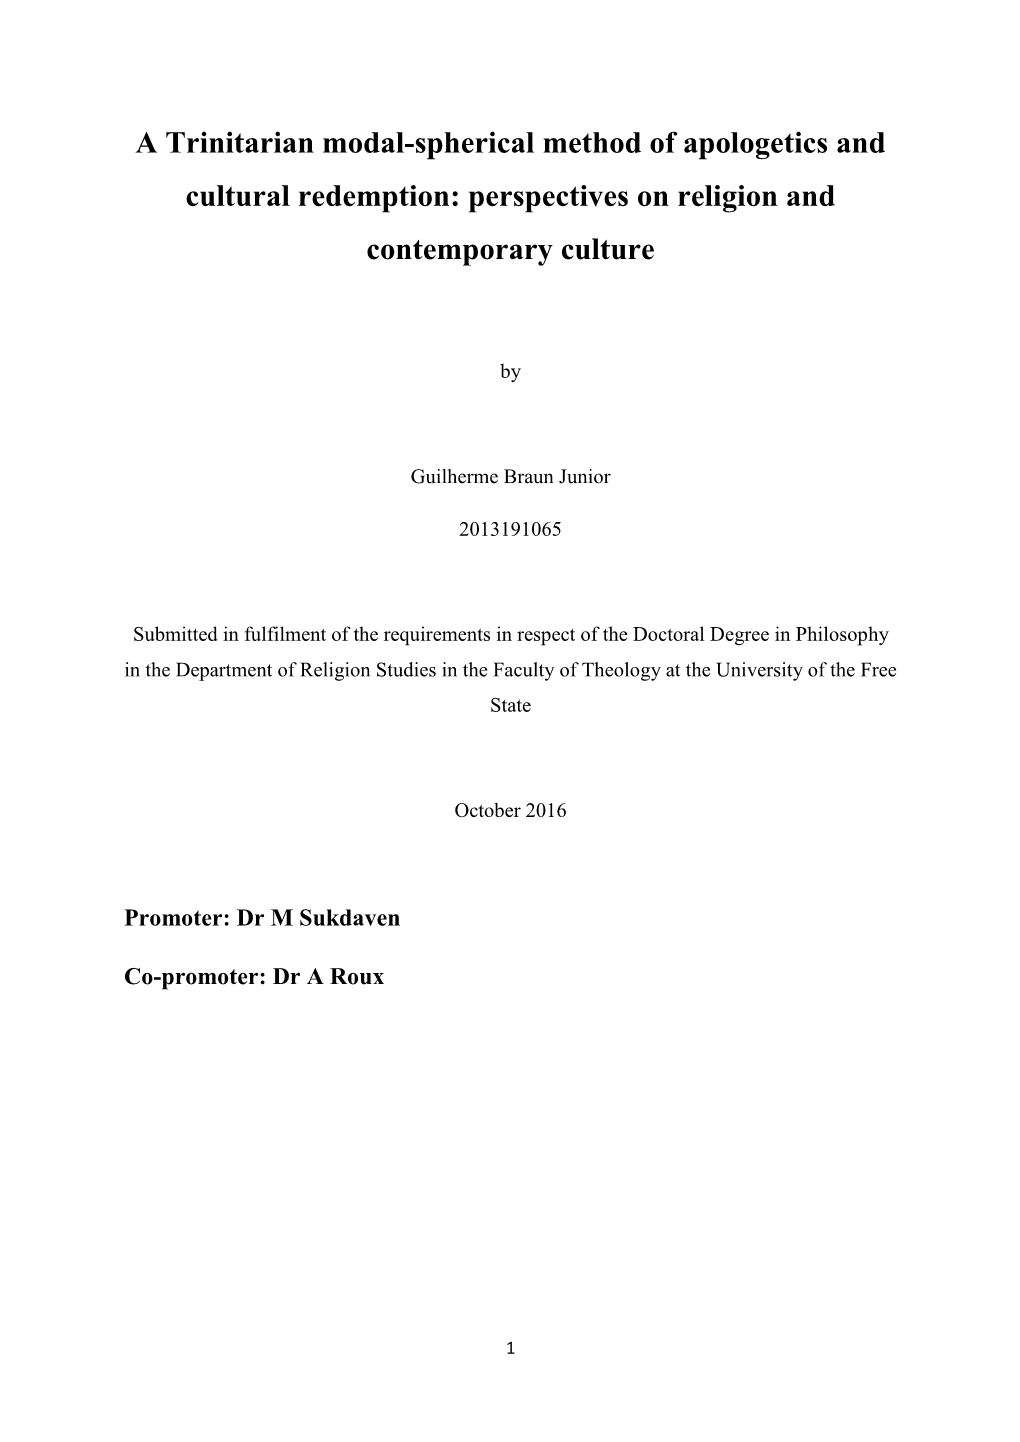 A Trinitarian Modal-Spherical Method of Apologetics and Cultural Redemption: Perspectives on Religion and Contemporary Culture